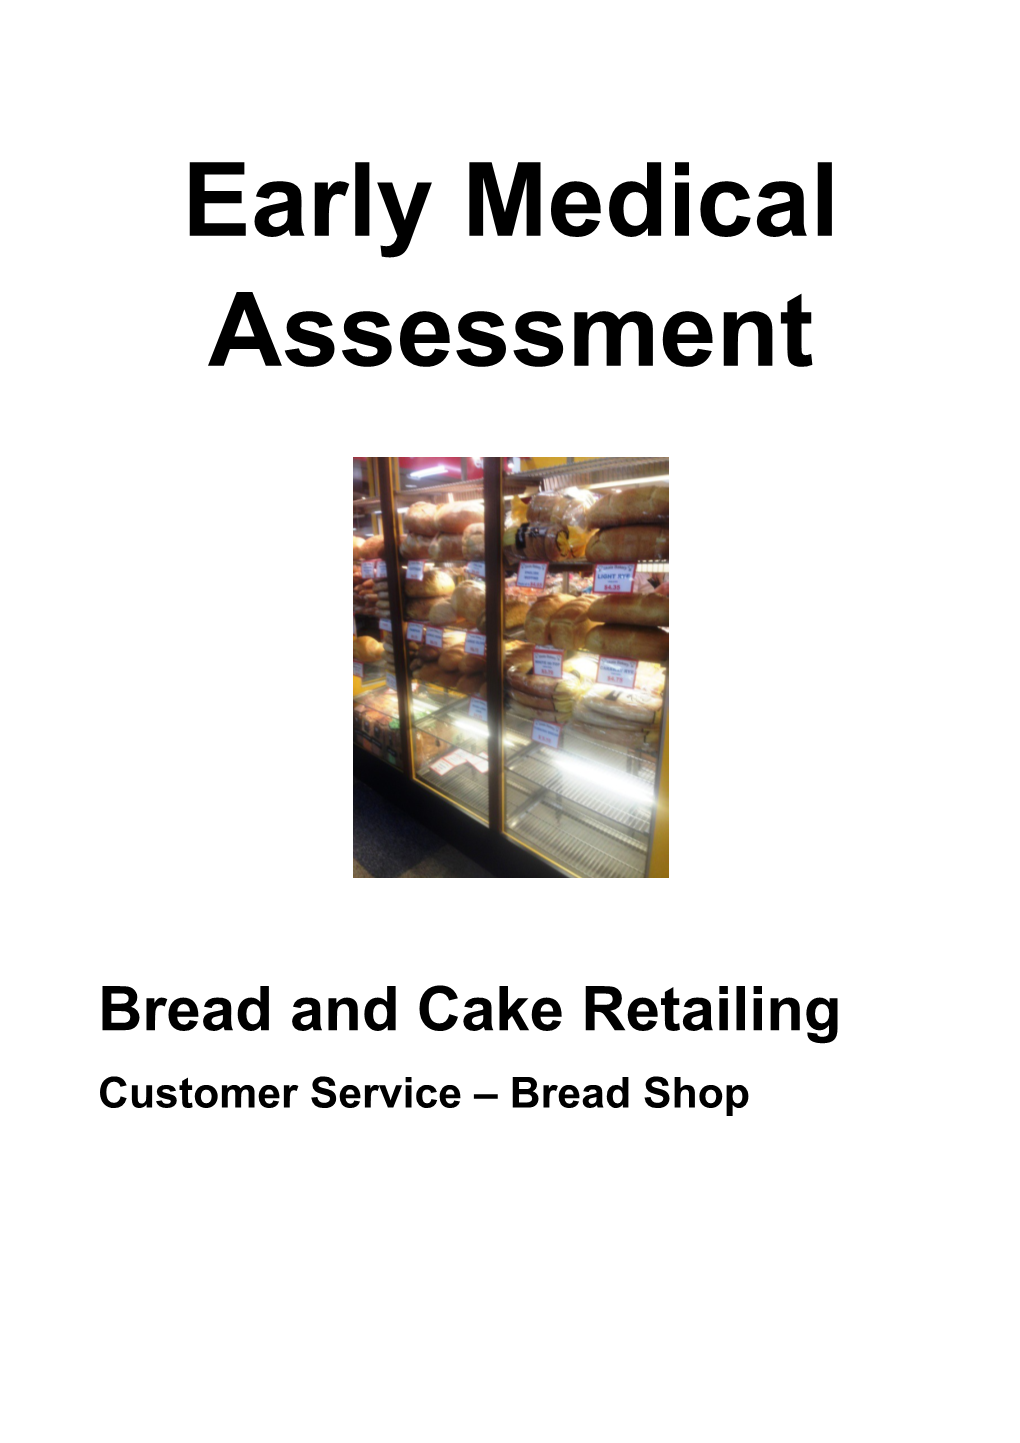 Bread and Cake Retailing - Customer Service 3